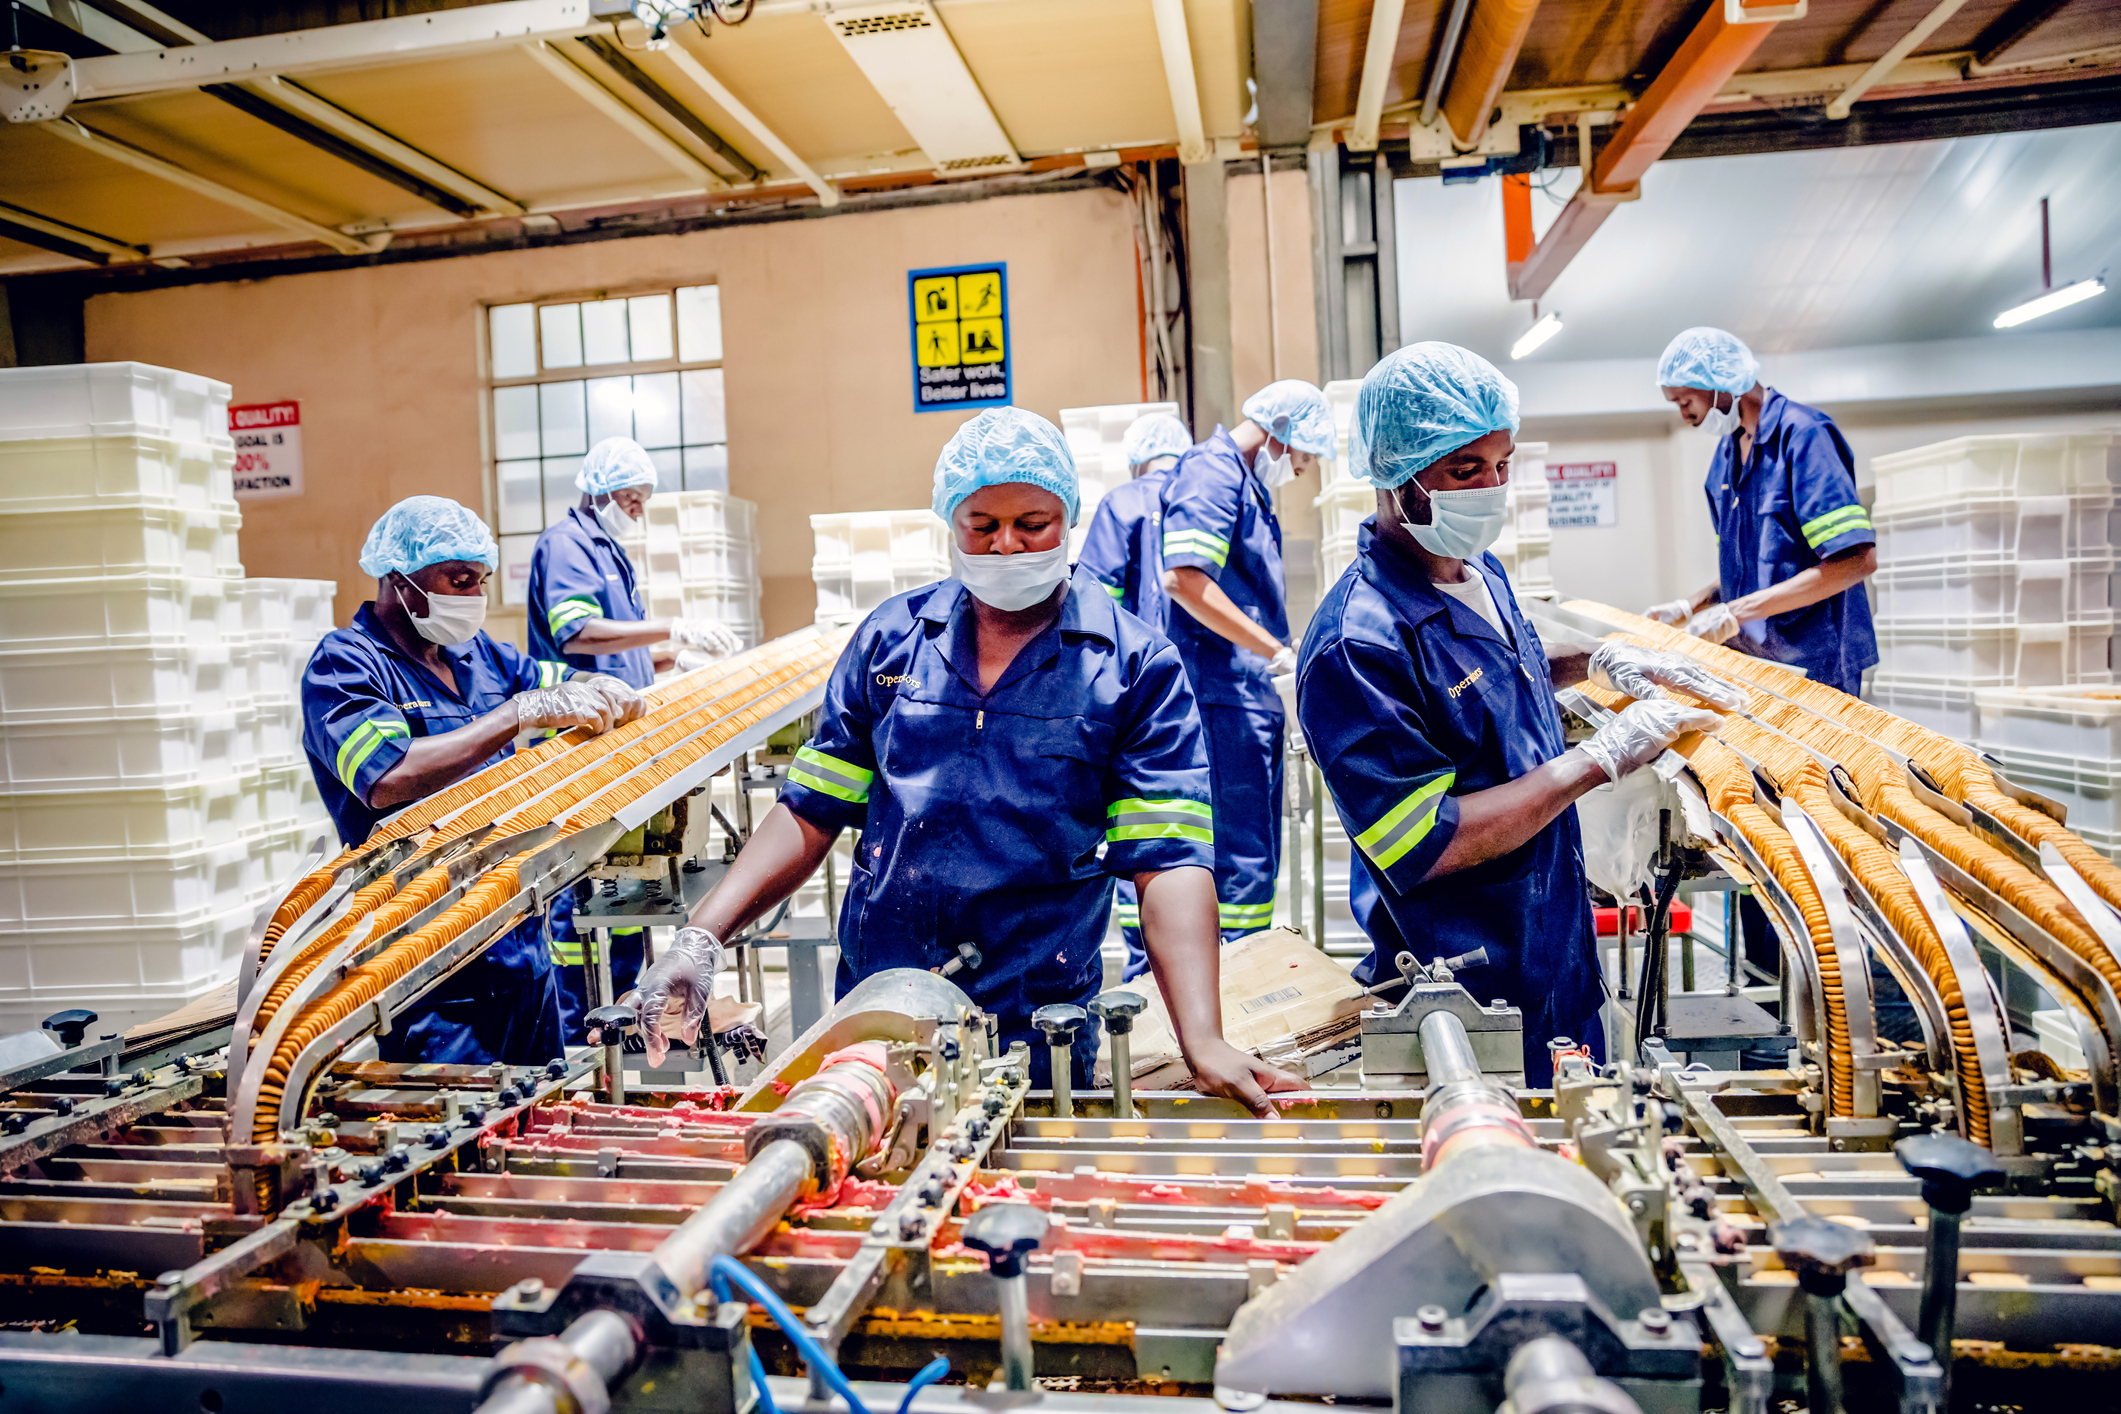 Production Line Workers at a Biscuit Factory in Africa - IGC